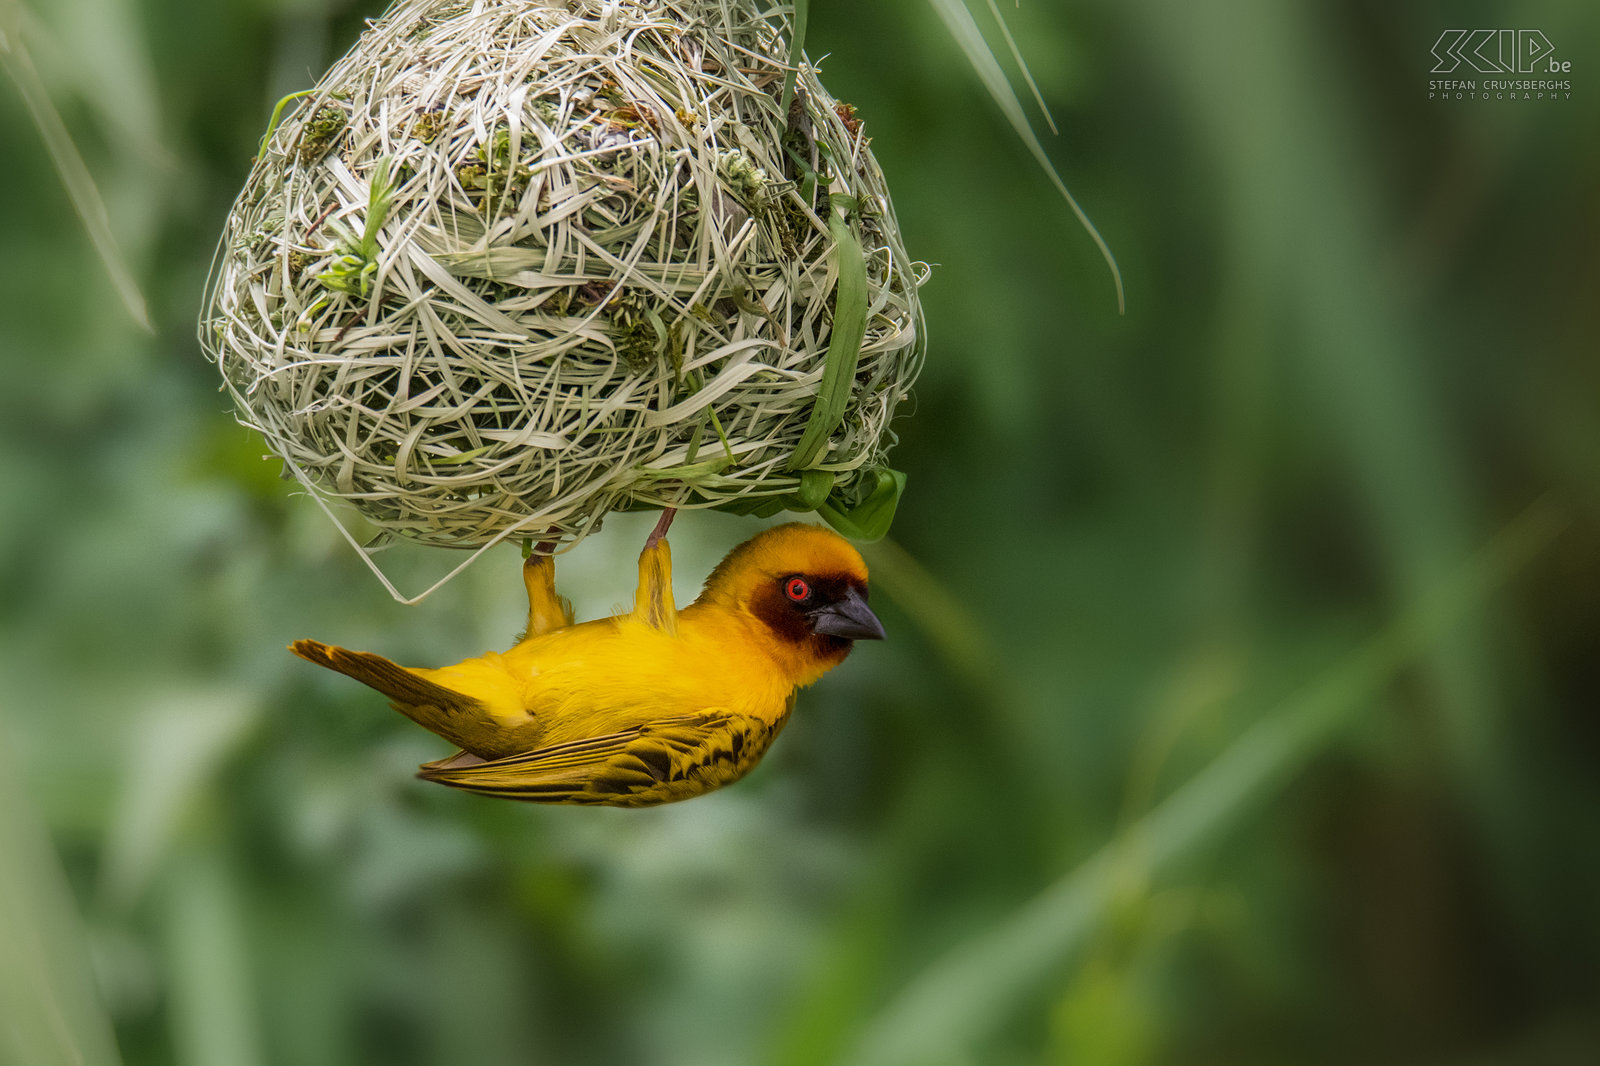 Debre Zeit - Vitelline masked weaver Males Weavers build new nests with green vegetation. The woven nest of the Vitelline masked weaver (Ploceus vitellinus) is accessible at the bottom. Stefan Cruysberghs